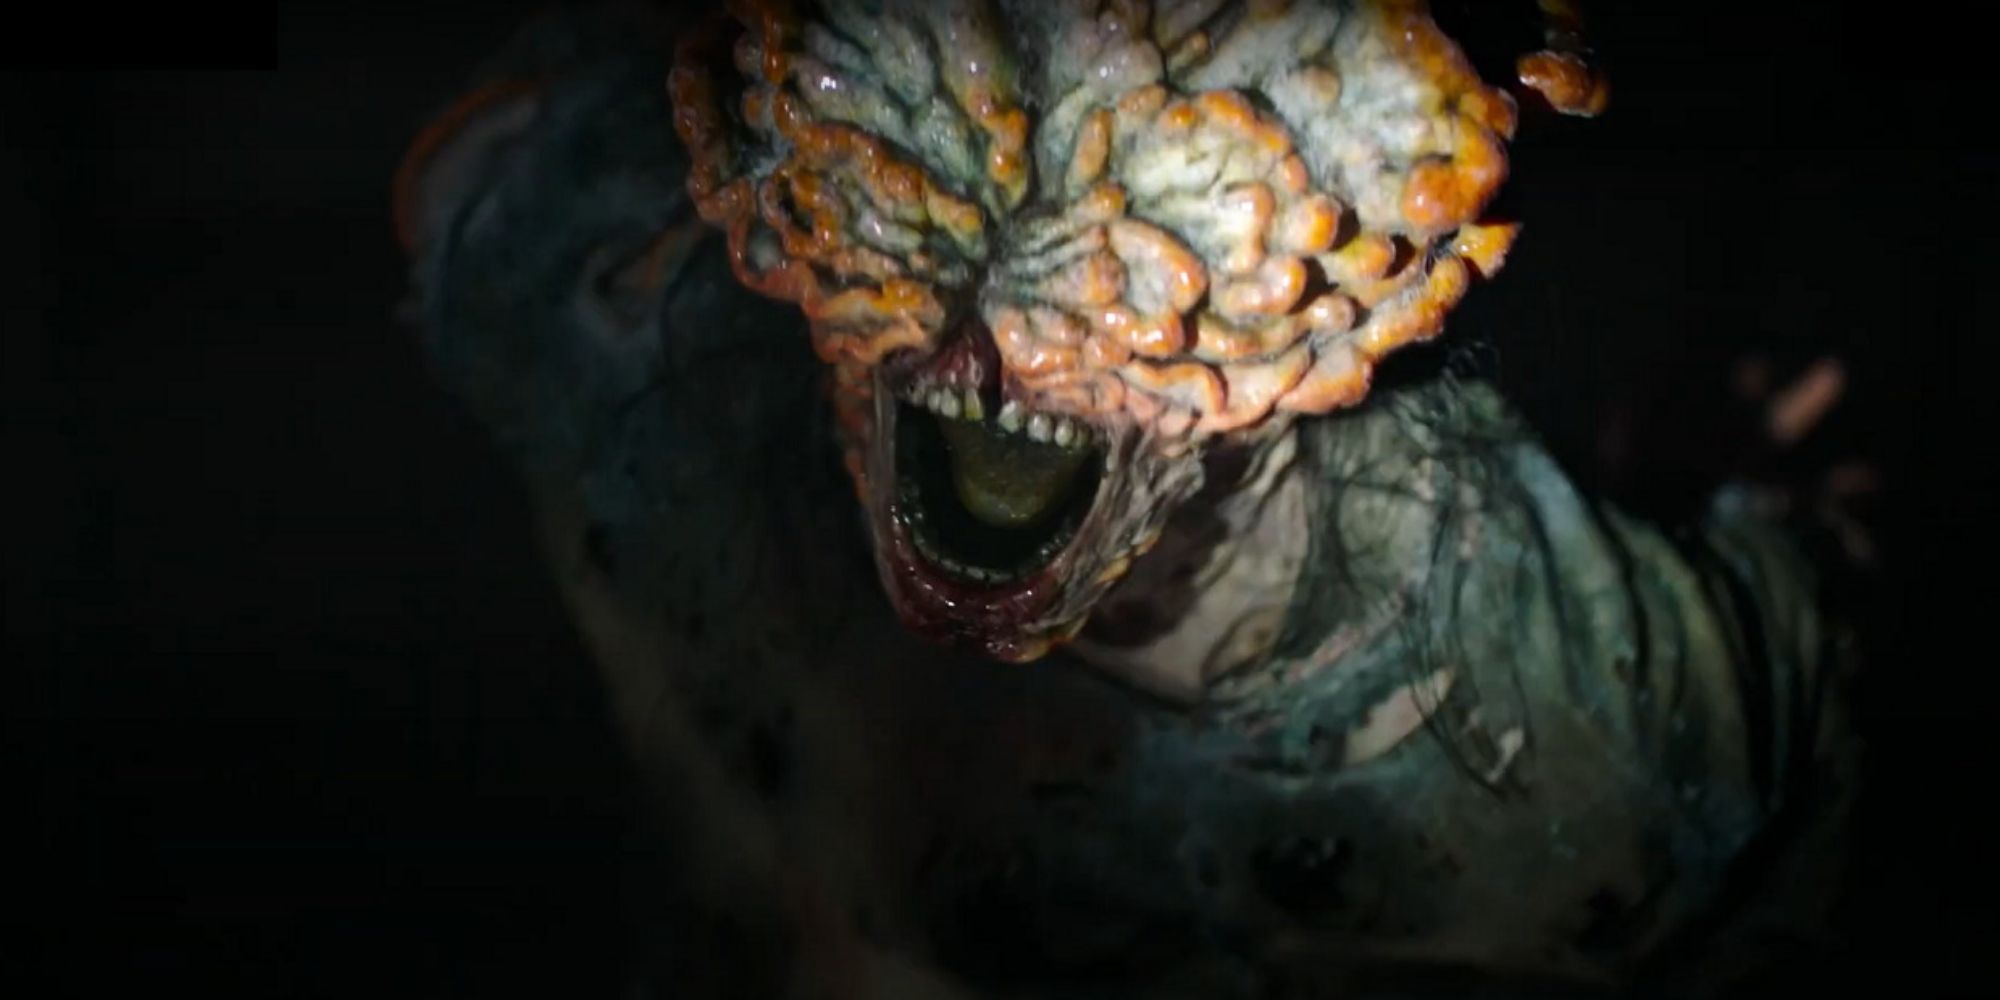 Close-up of a Clicker in the dark from HBO's 'The Last of Us'